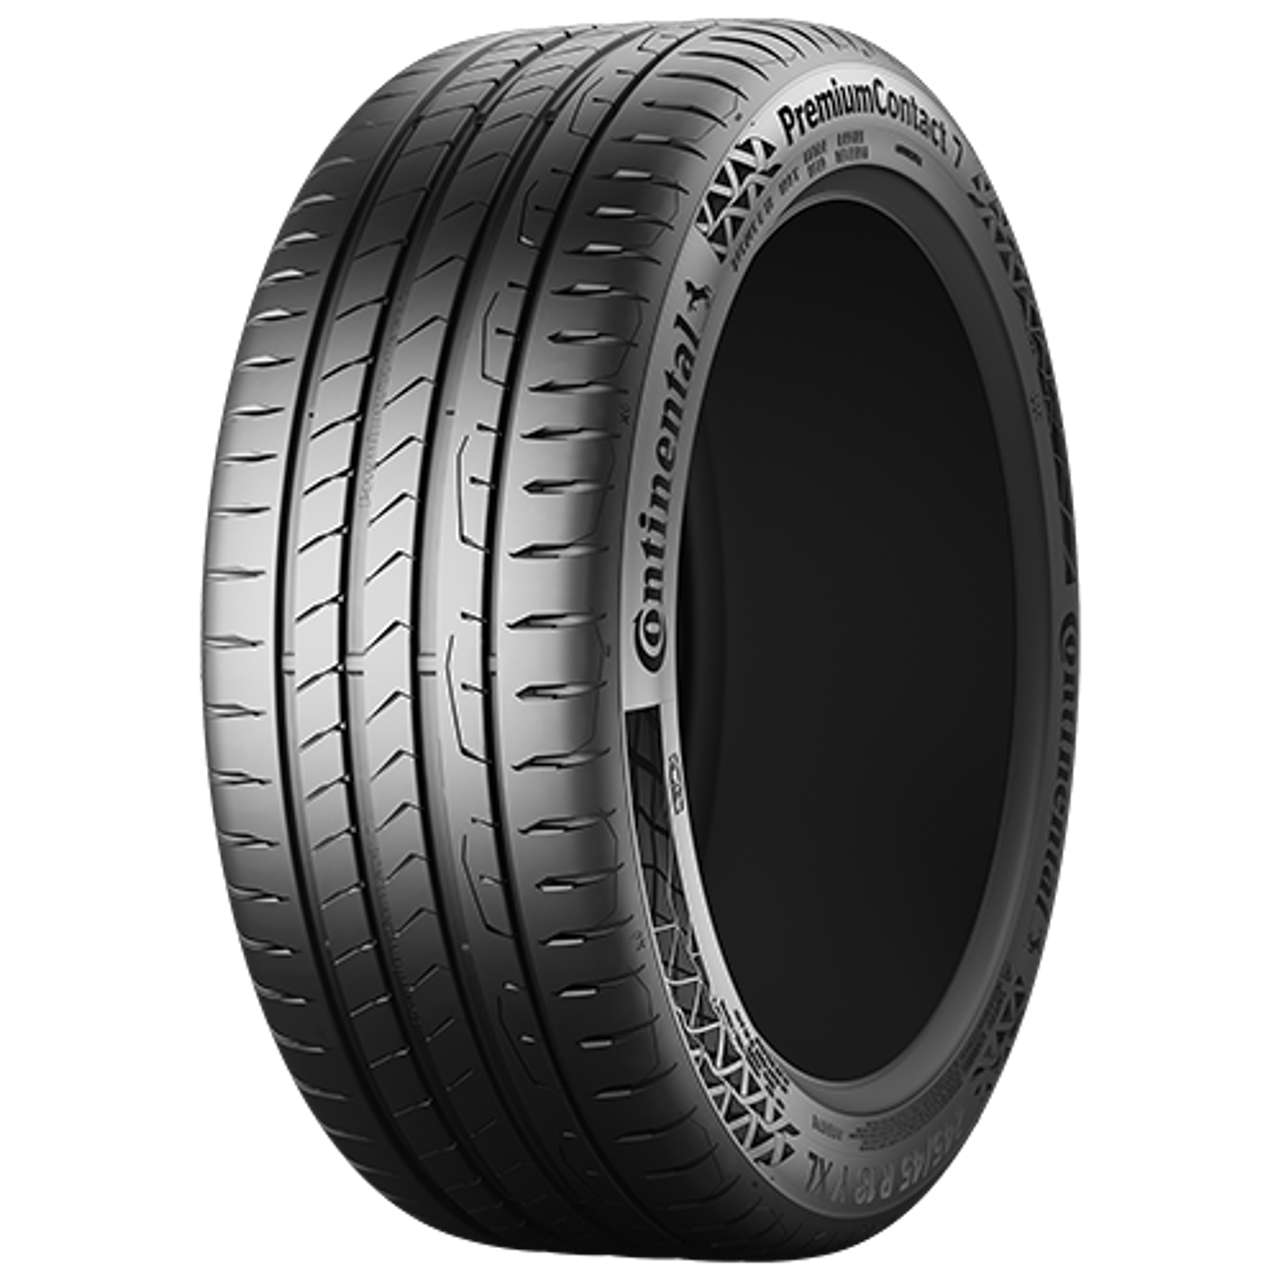 CONTINENTAL PREMIUMCONTACT 7 (EVc) 205/55R16 91H BSW